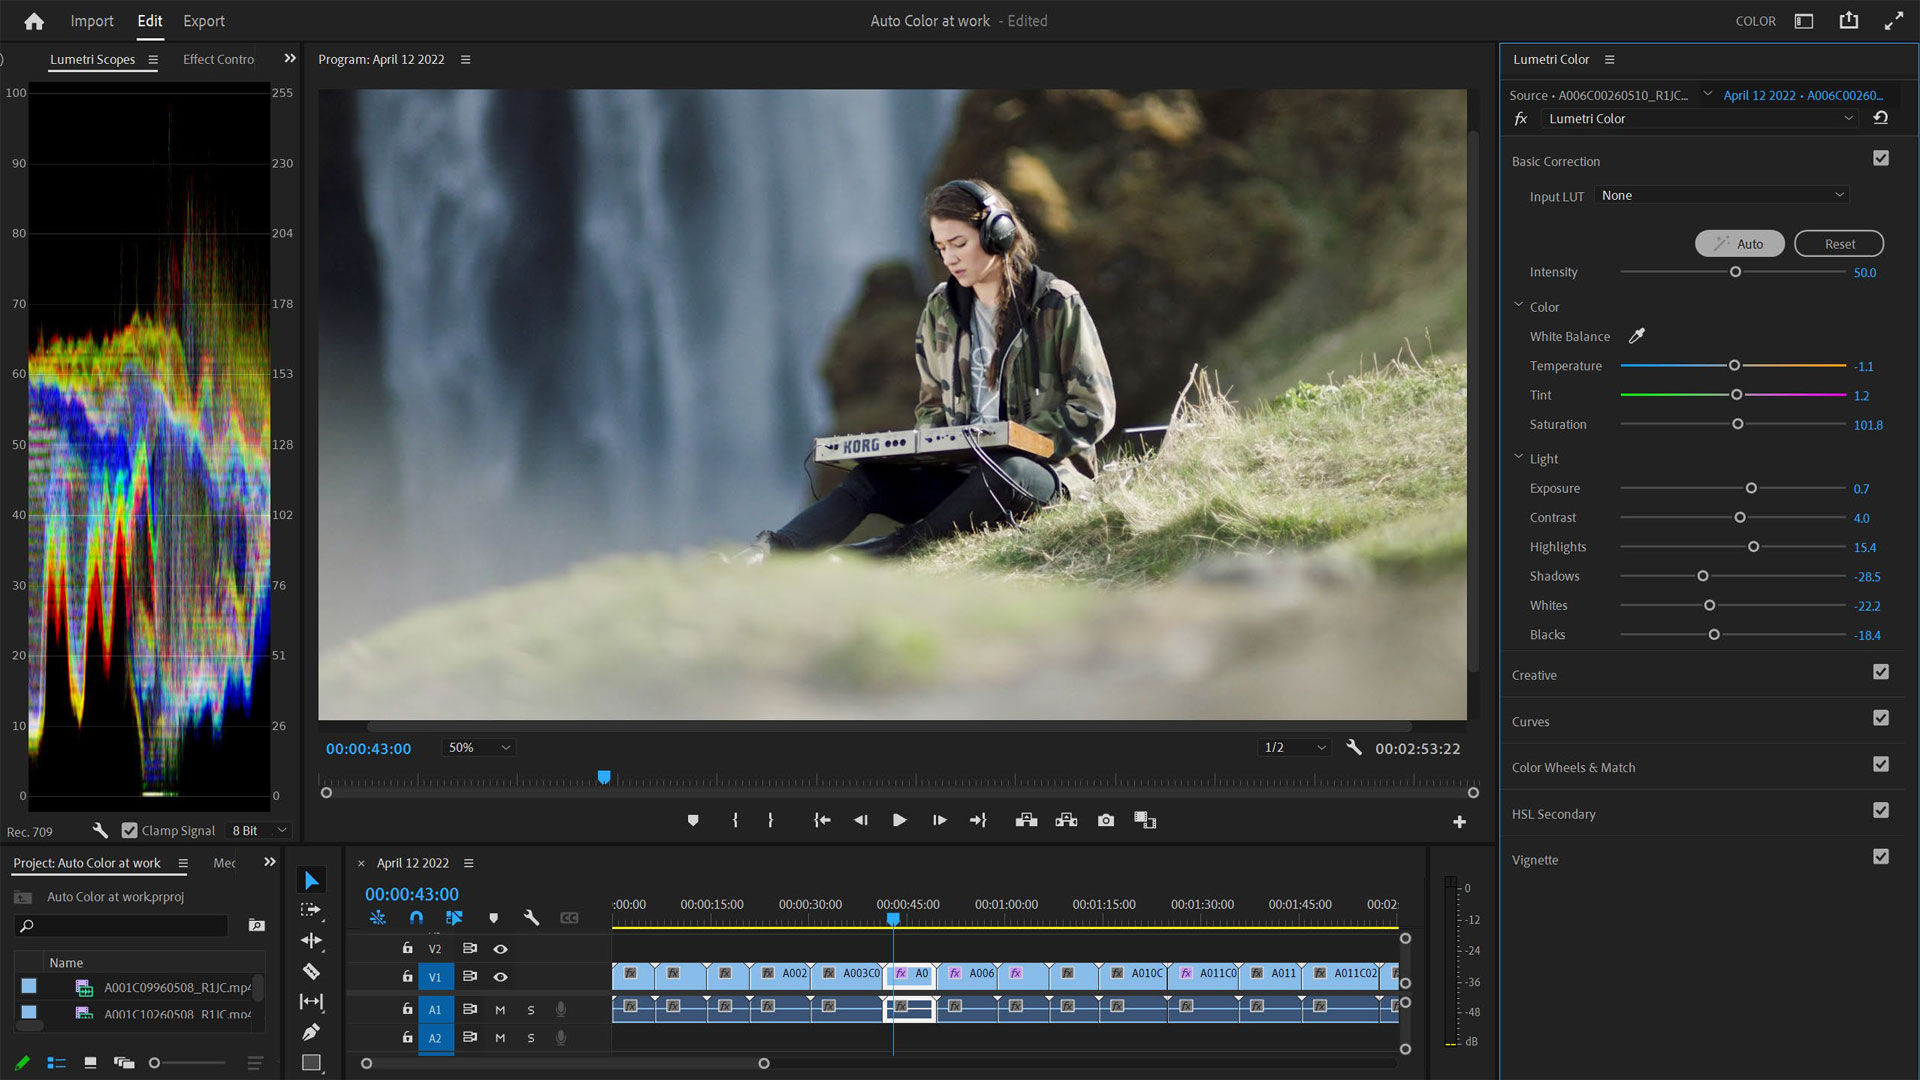 Turbo-charge your video workflow with the latest Creative Cloud updates